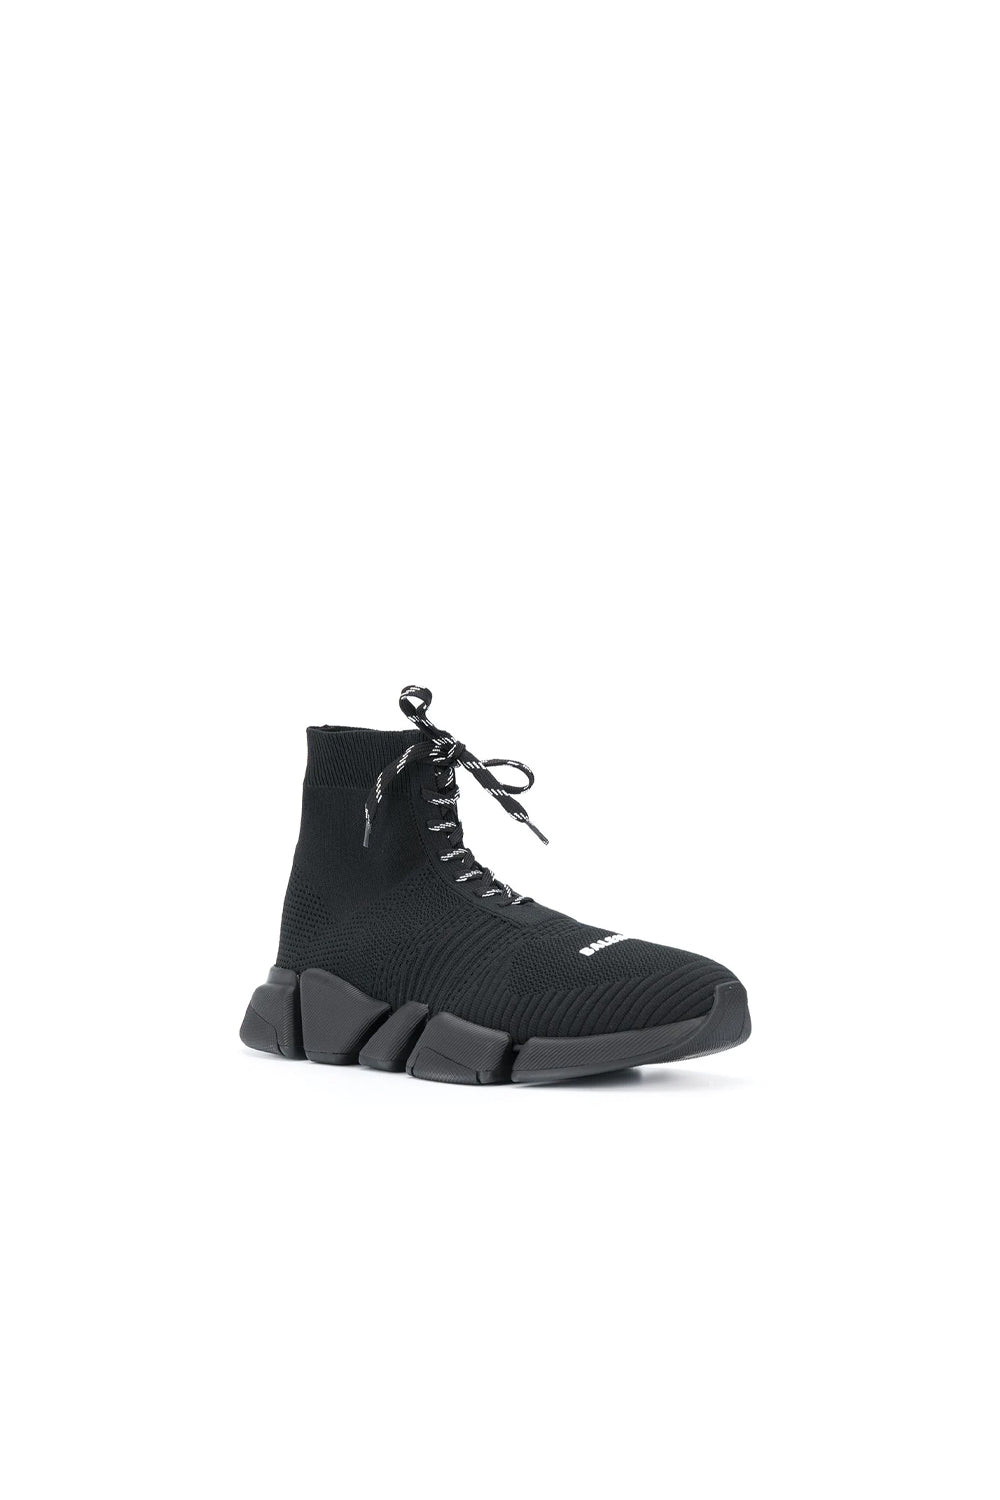 Balenciaga Speed.2 lace-up sneakers